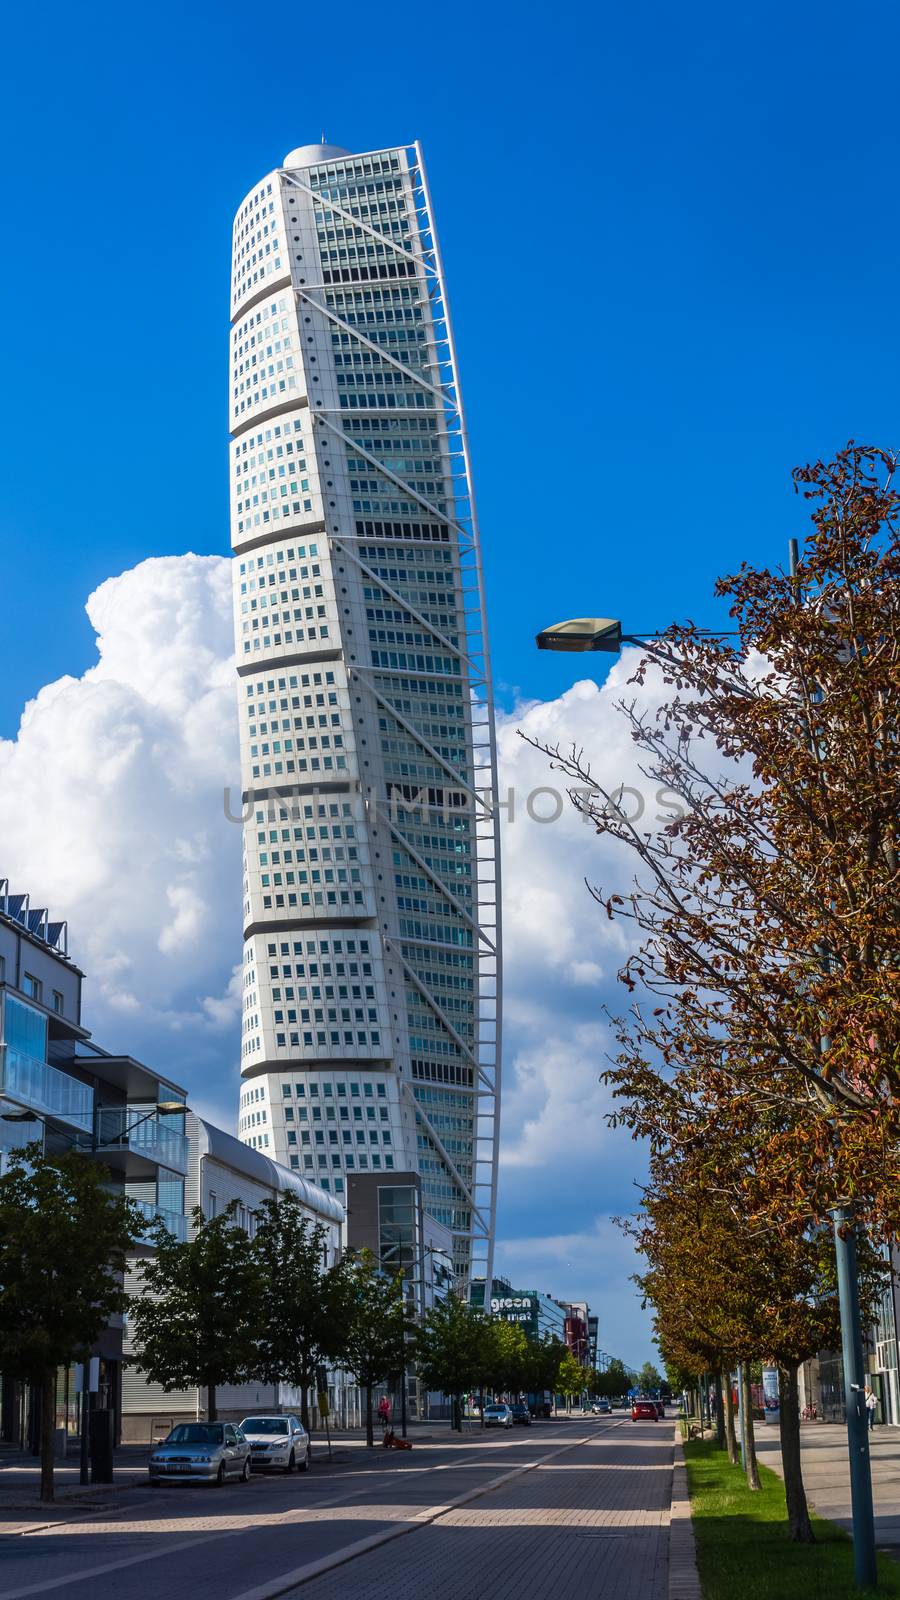 HSB Turning Torso, the tallest tower in Scandinavia at 190 m high, combines office and residential functions. Designed by the Spanish architect Santiago Calatrava.